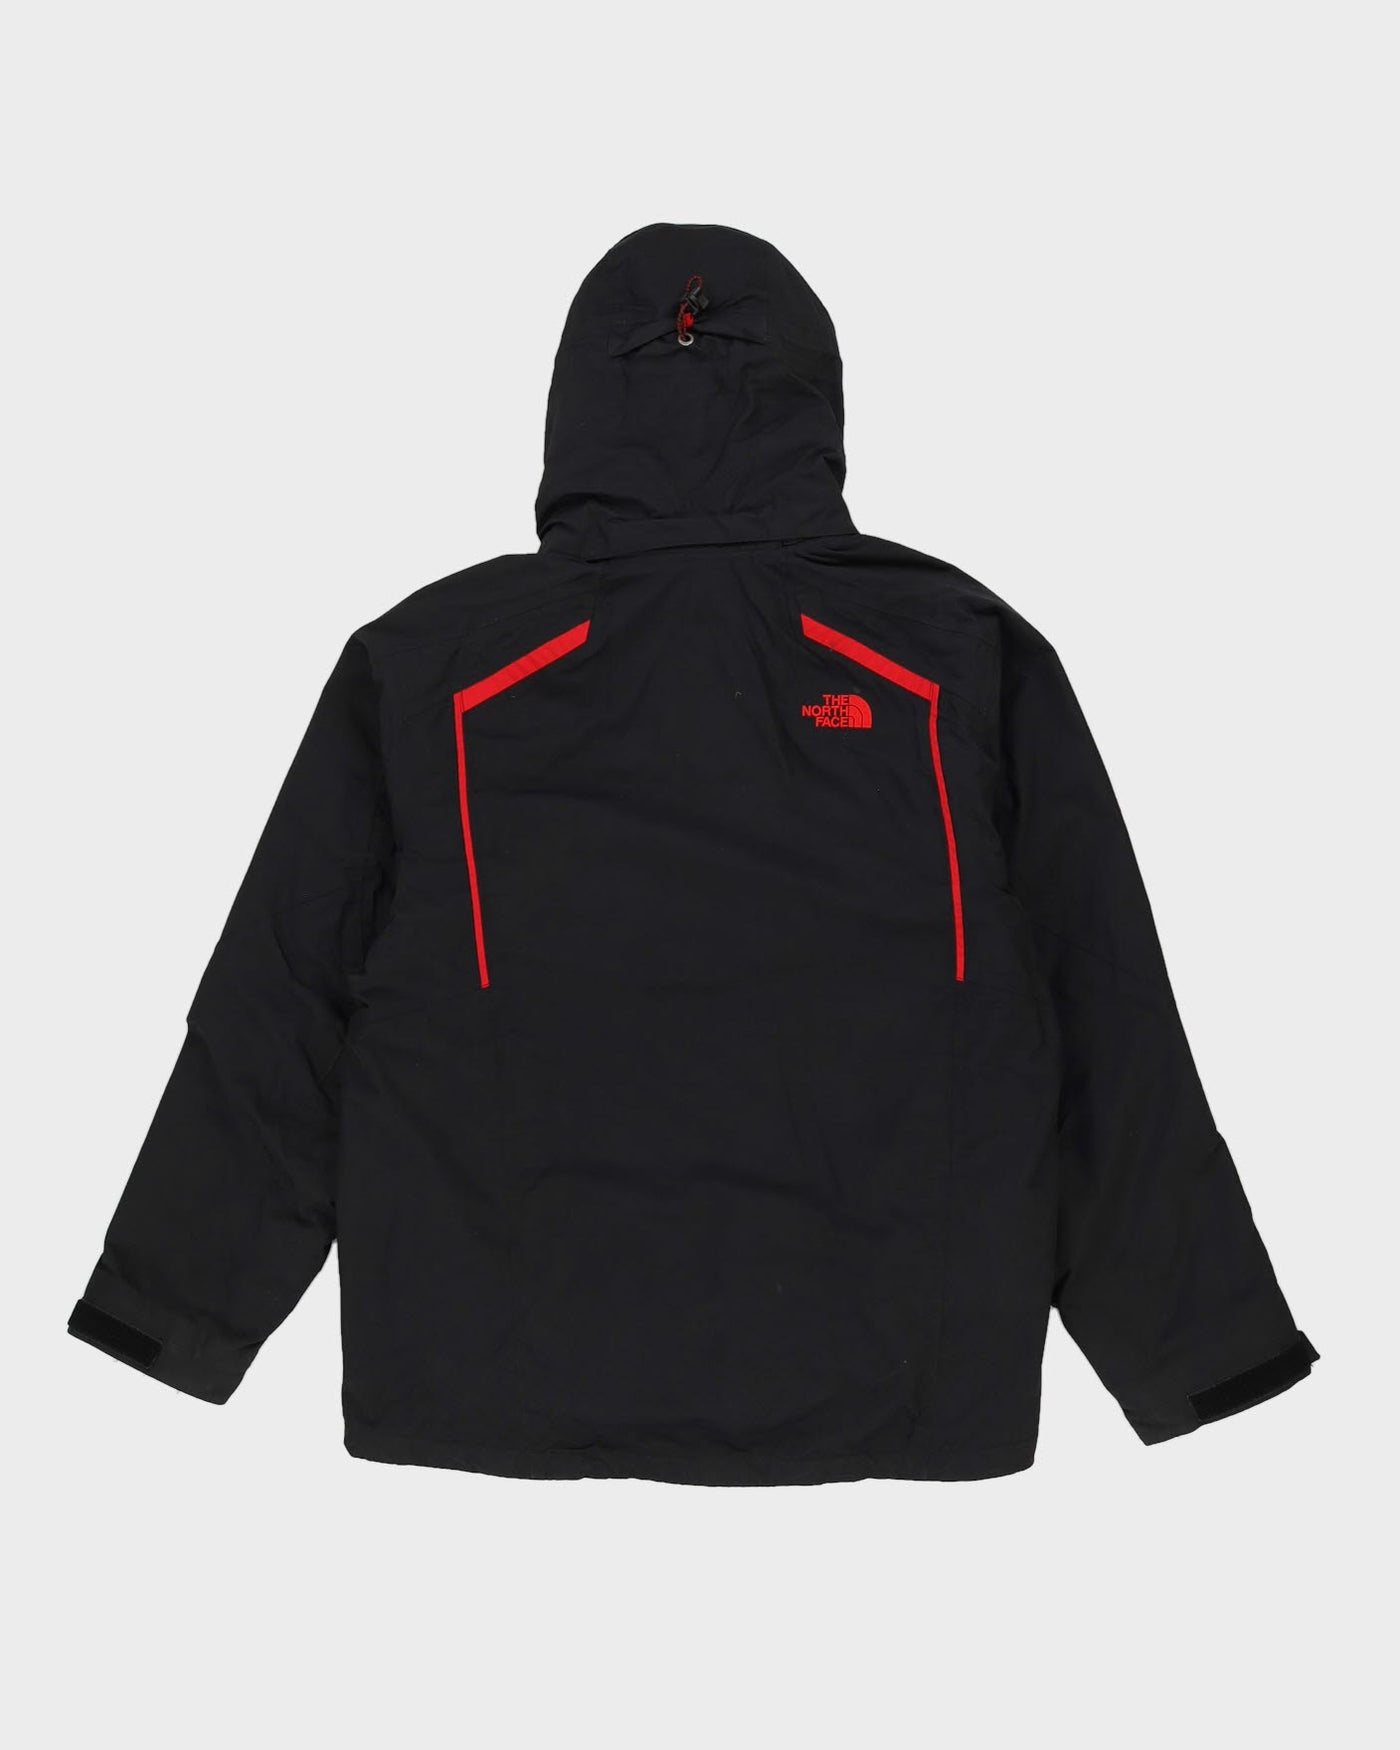 The North Face Black Anorak Jacket - M